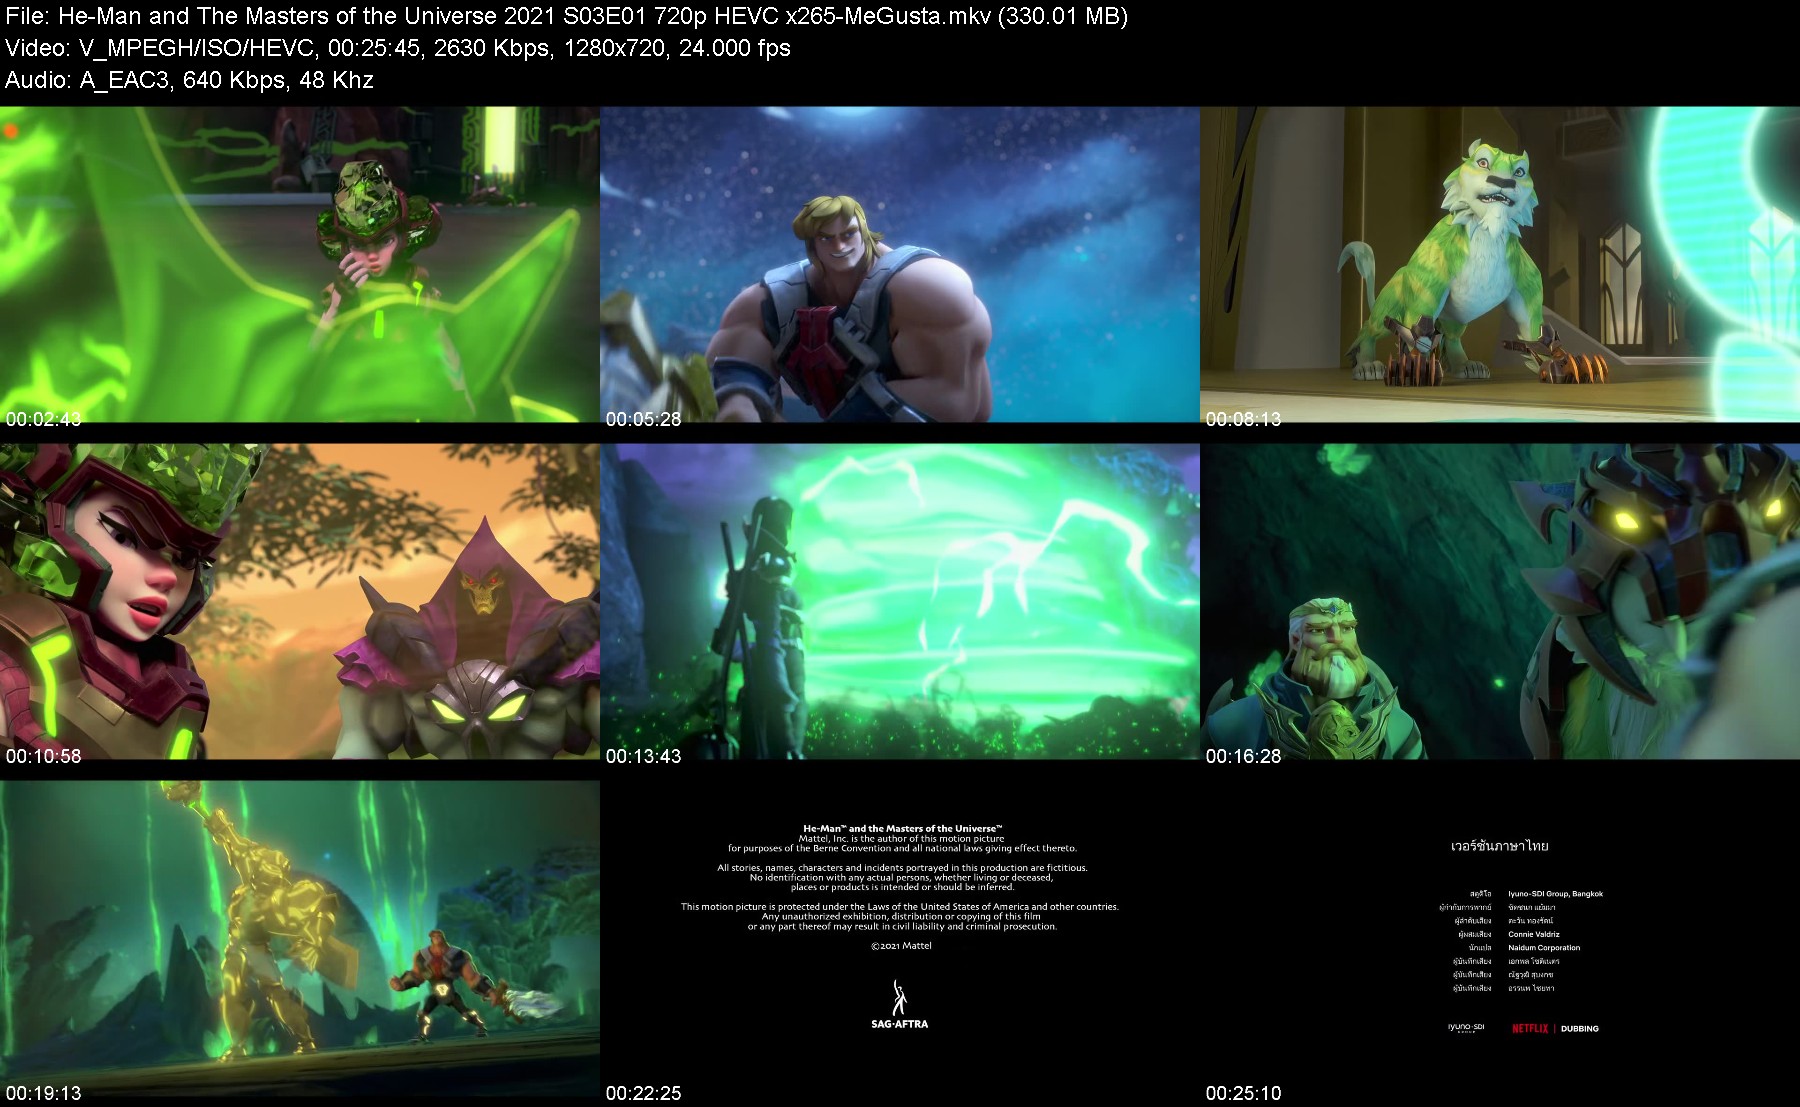 300784225_he-man-and-the-masters-of-the-universe-2021-s03e01-720p-hevc-x265-megusta.jpg